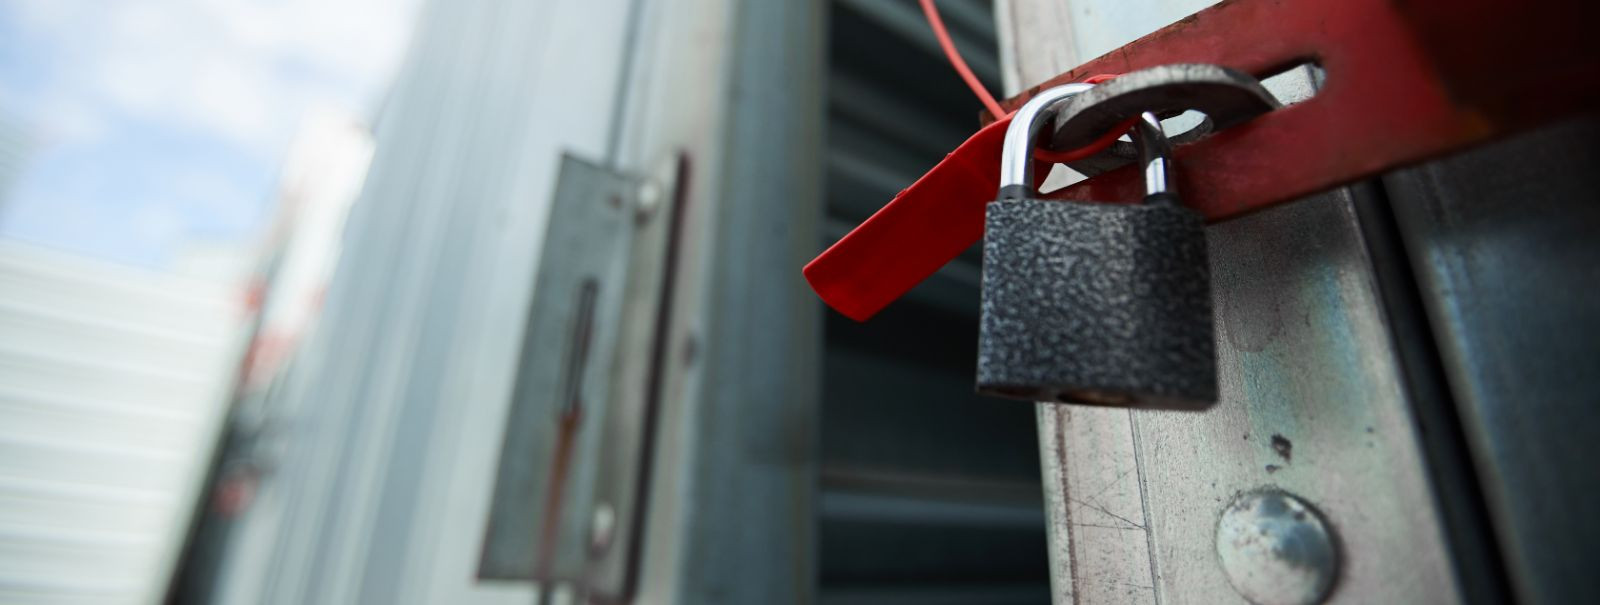 Security is a paramount concern for homeowners, renters, and vehicle owners alike. A robust padlock can be the first line of defense against theft and unauthori